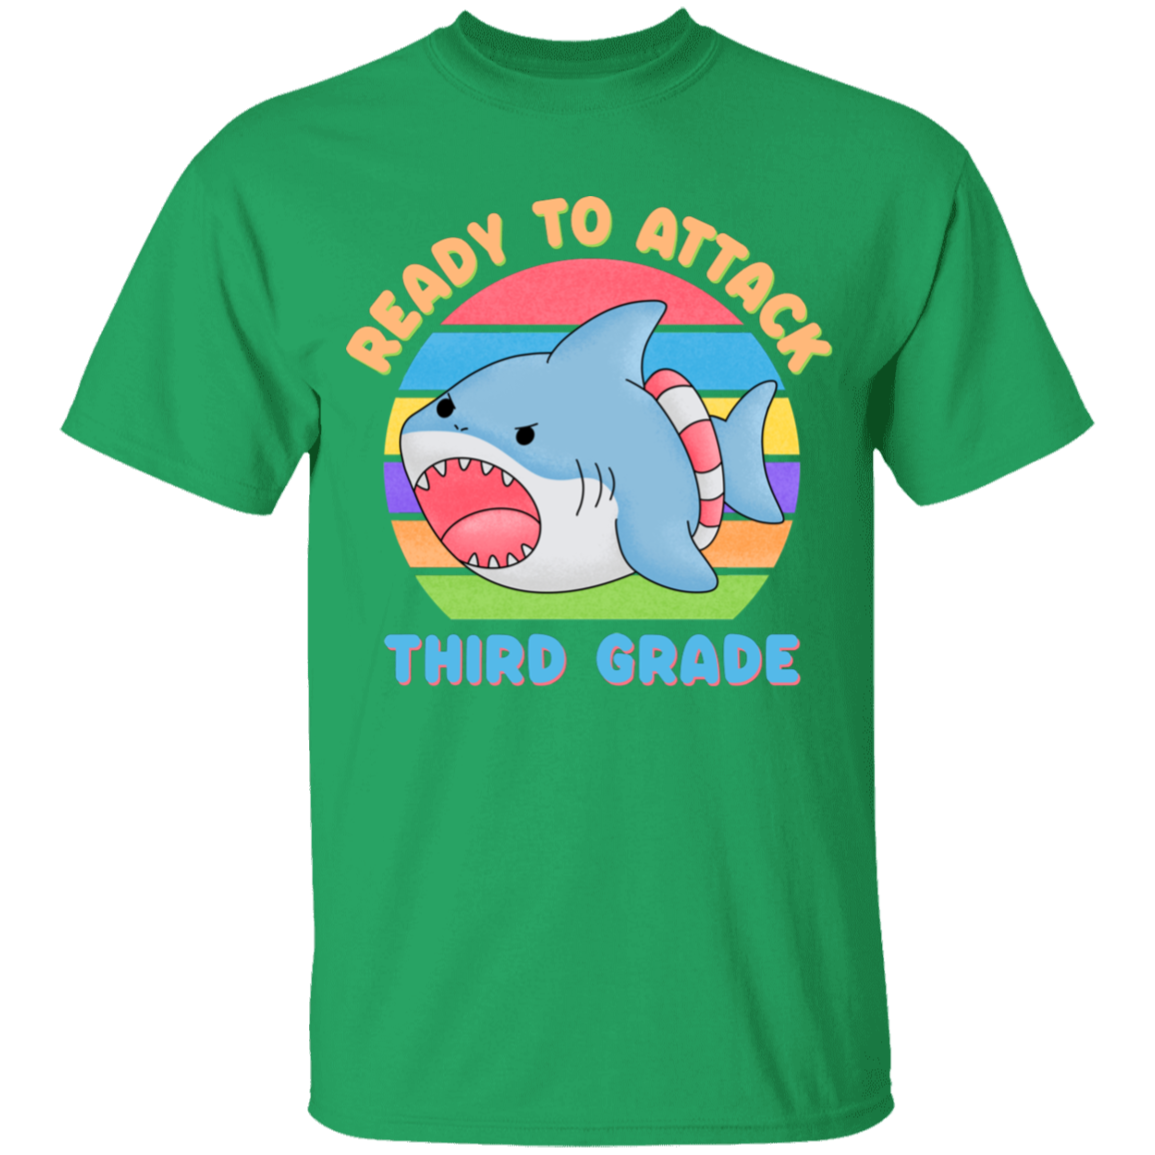 Ready To Attack Third Grade Youth Cotton T-Shirt